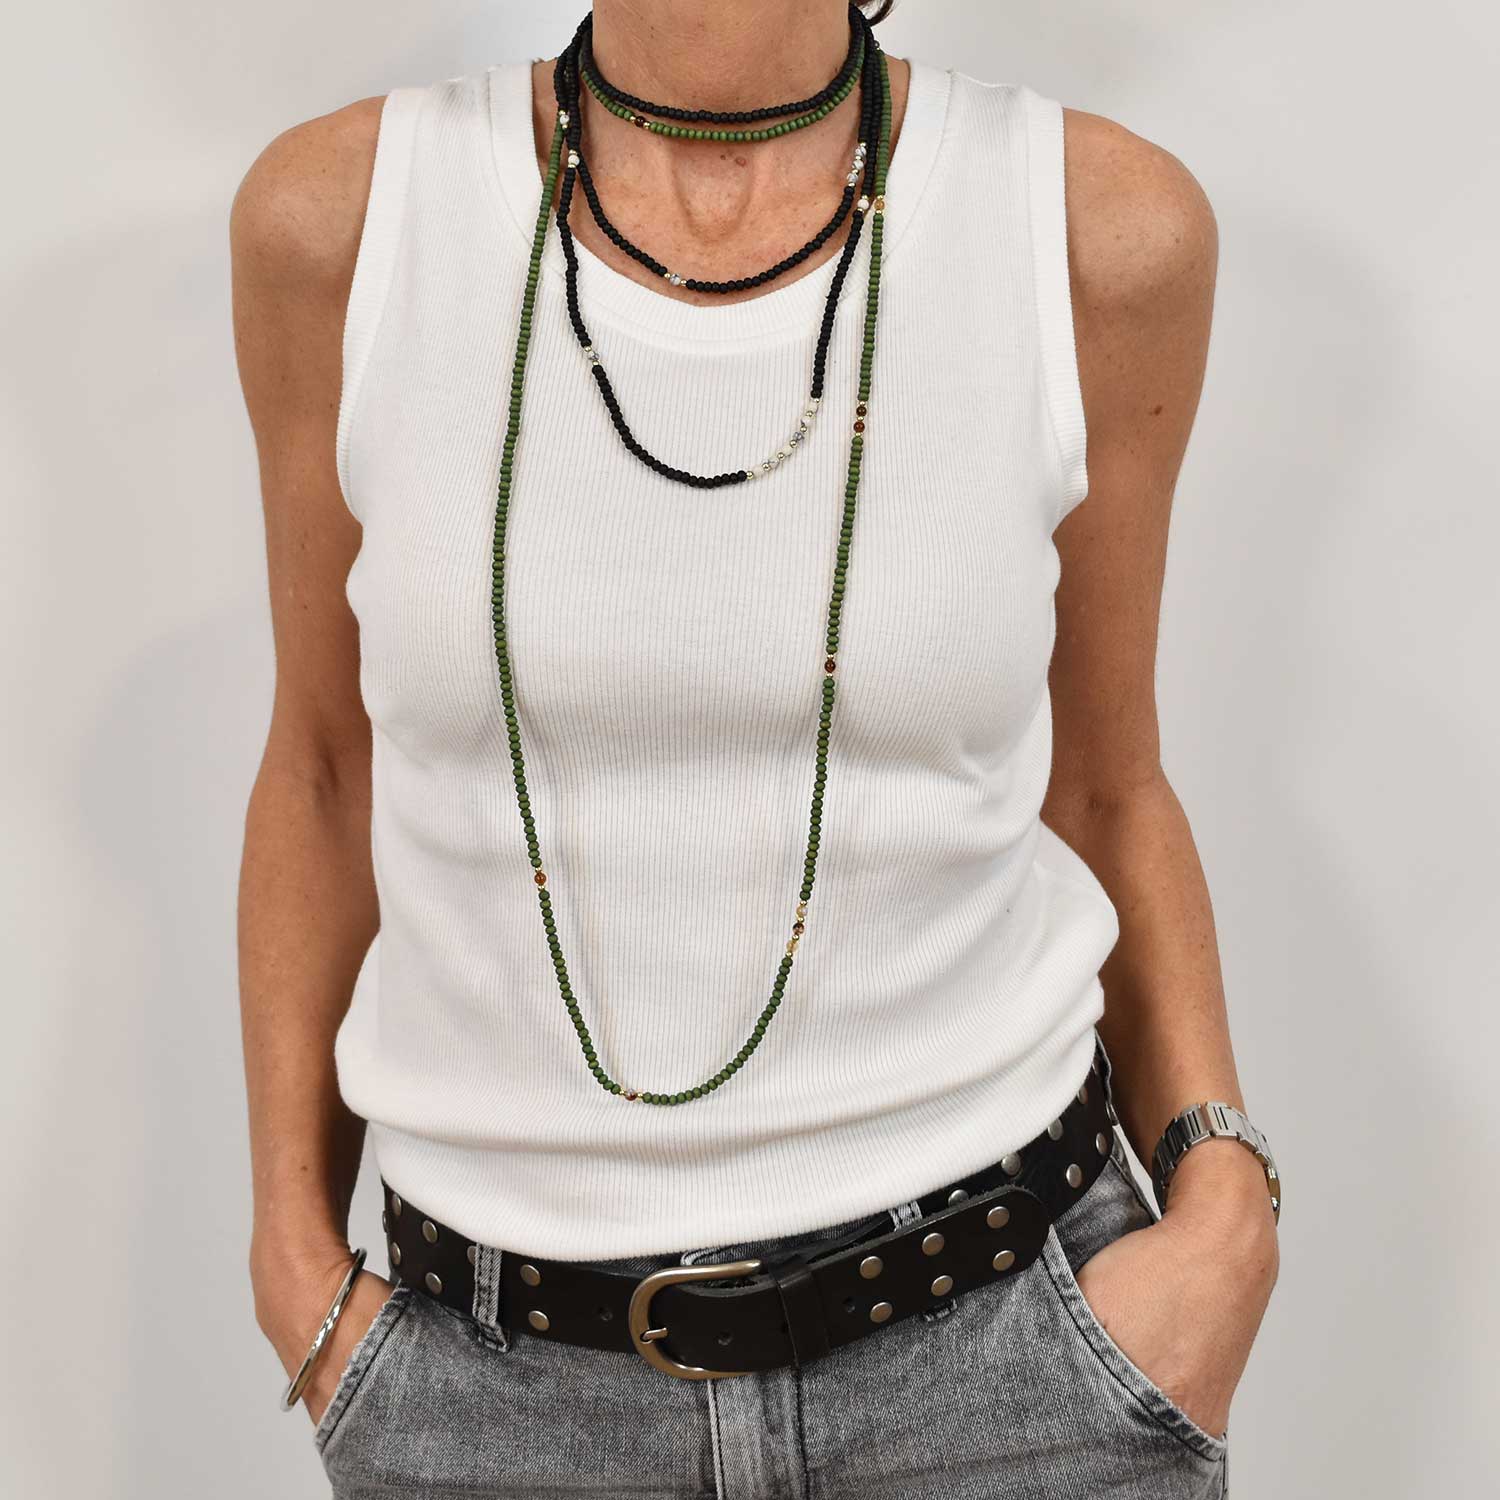 Green long beads necklace